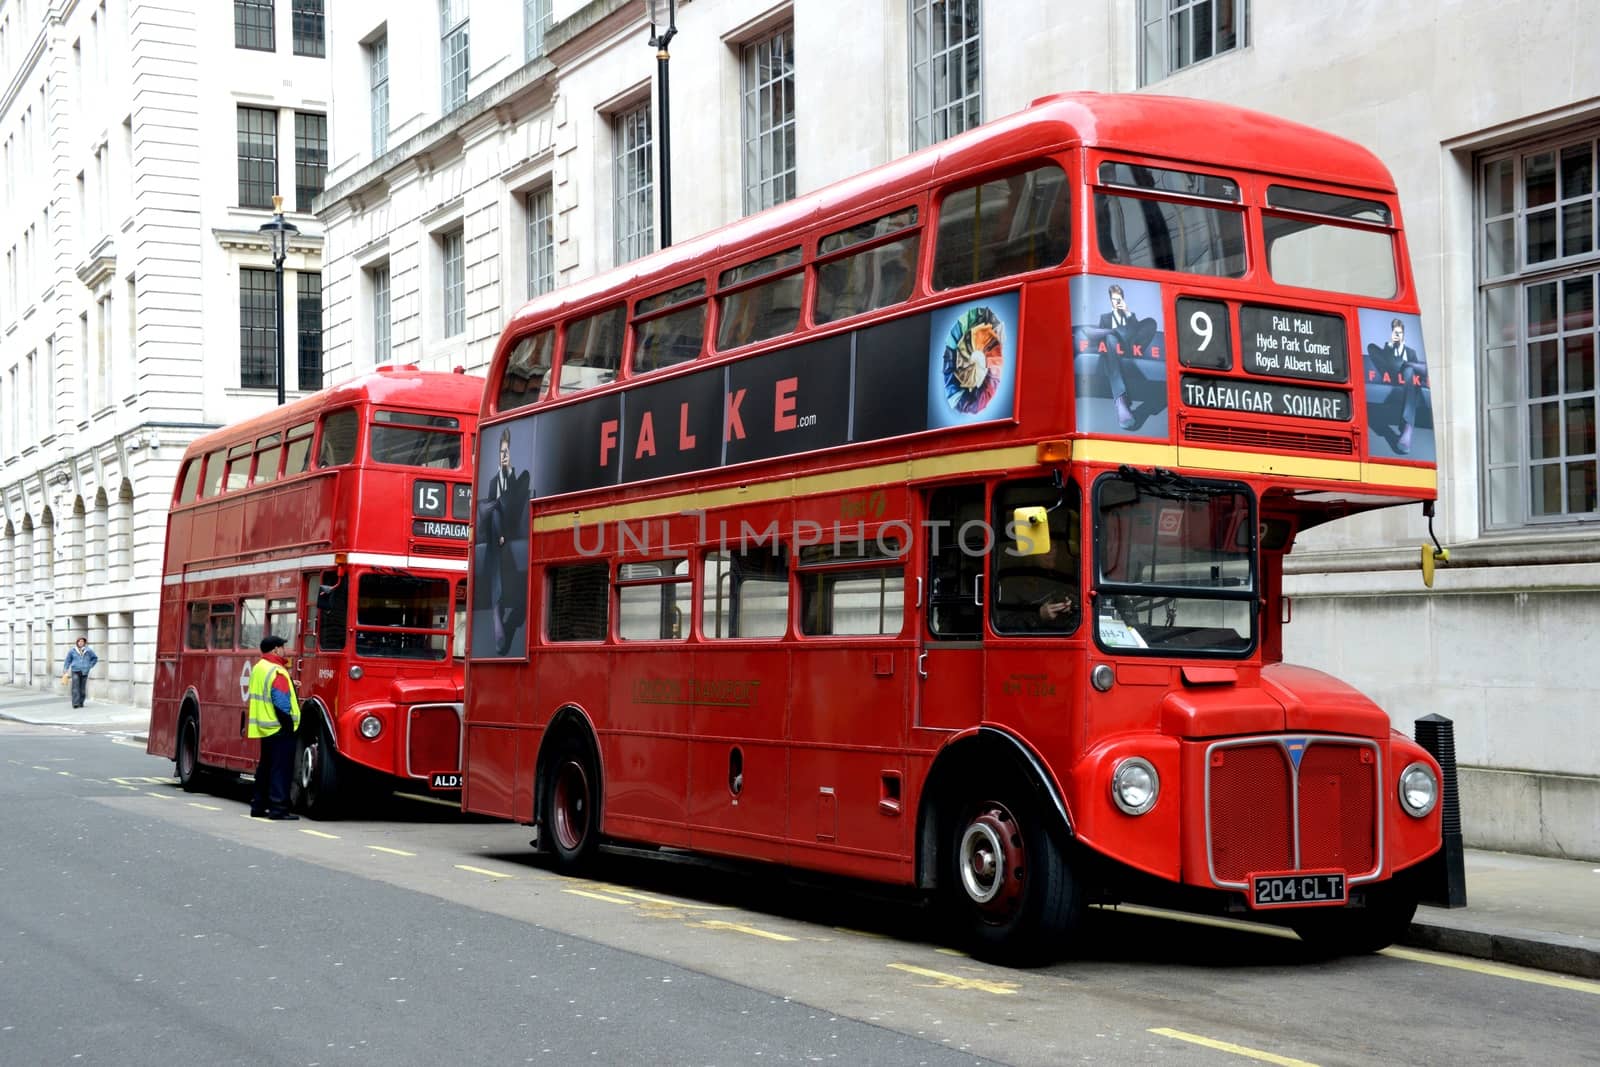 London red buses by gorilla